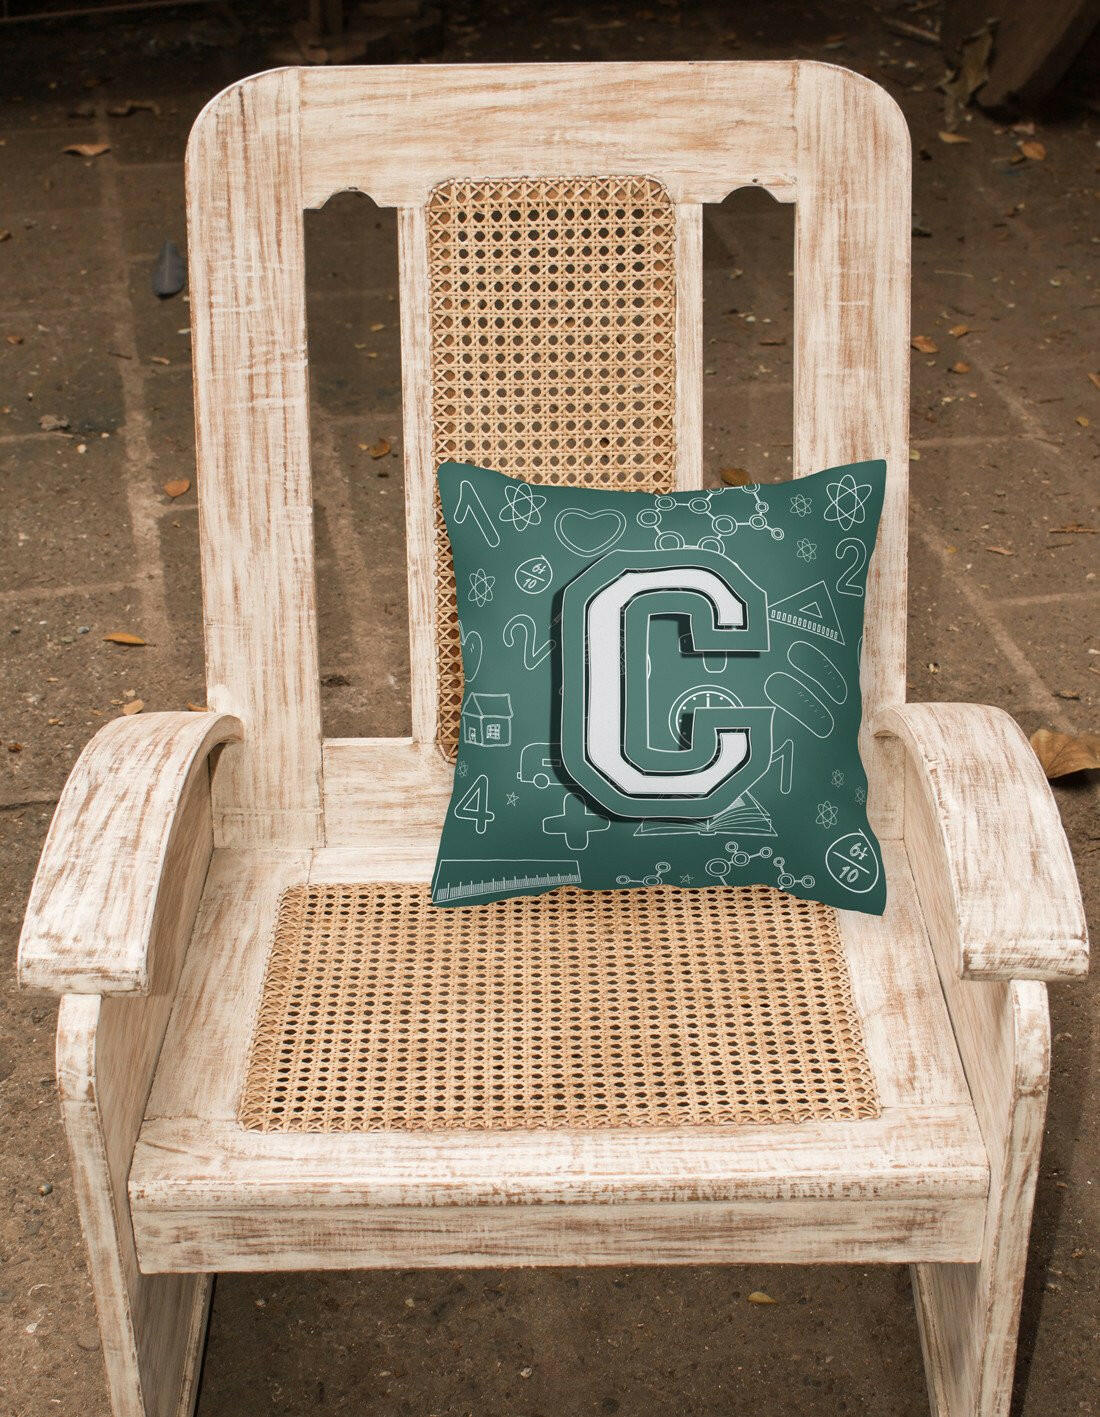 Letter C Back to School Initial Canvas Fabric Decorative Pillow CJ2010-CPW1414 by Caroline's Treasures